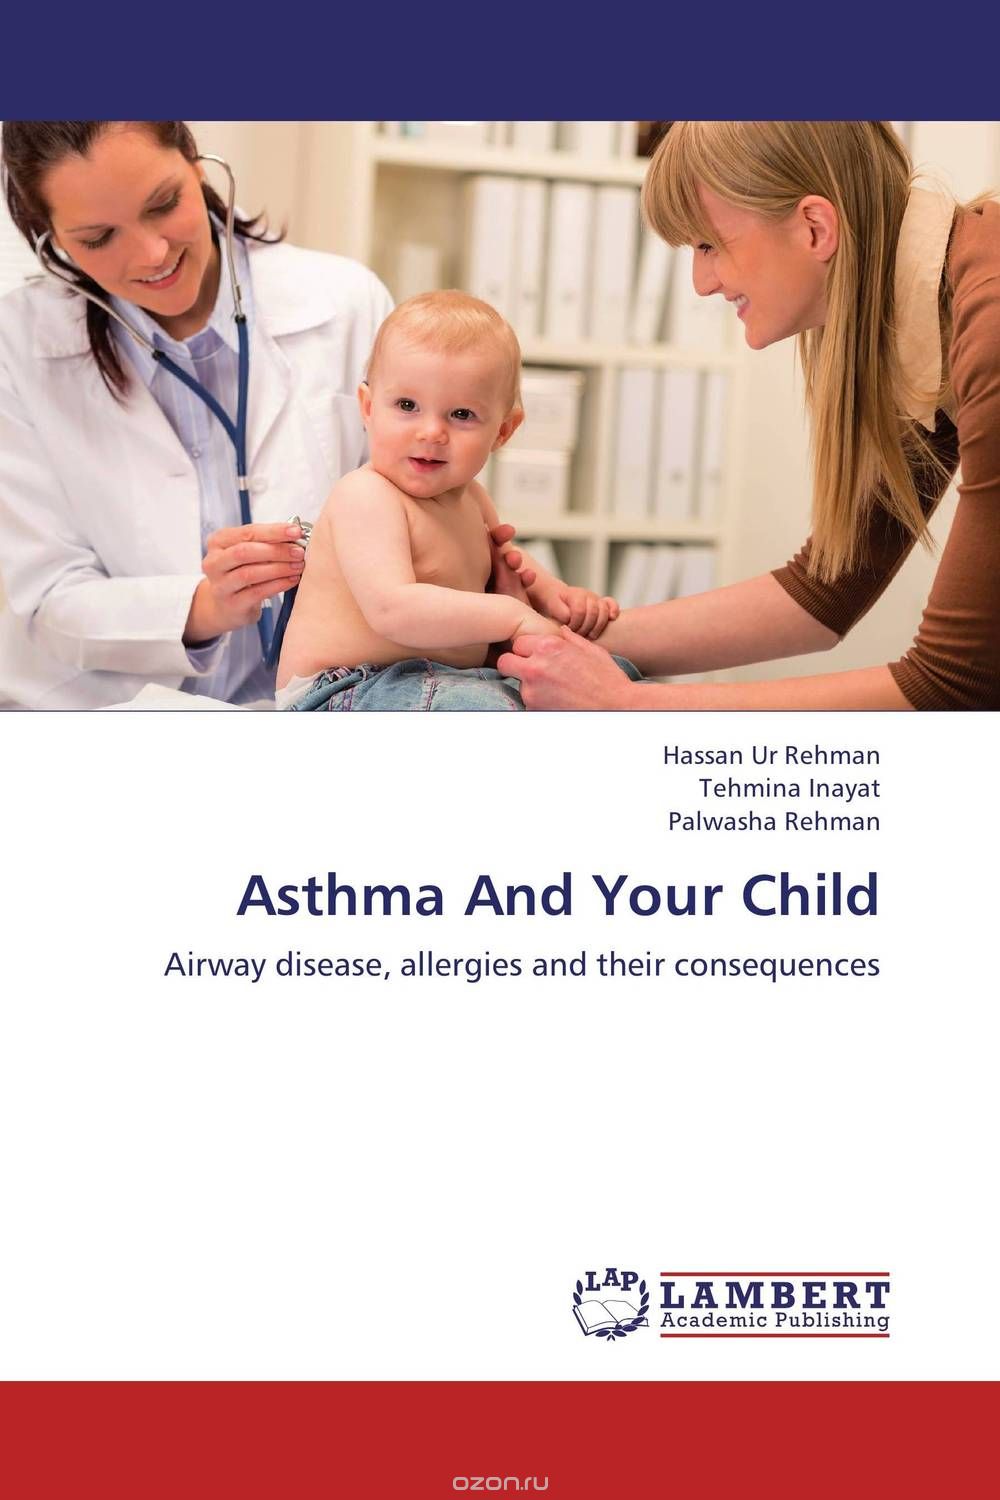 Asthma And Your Child